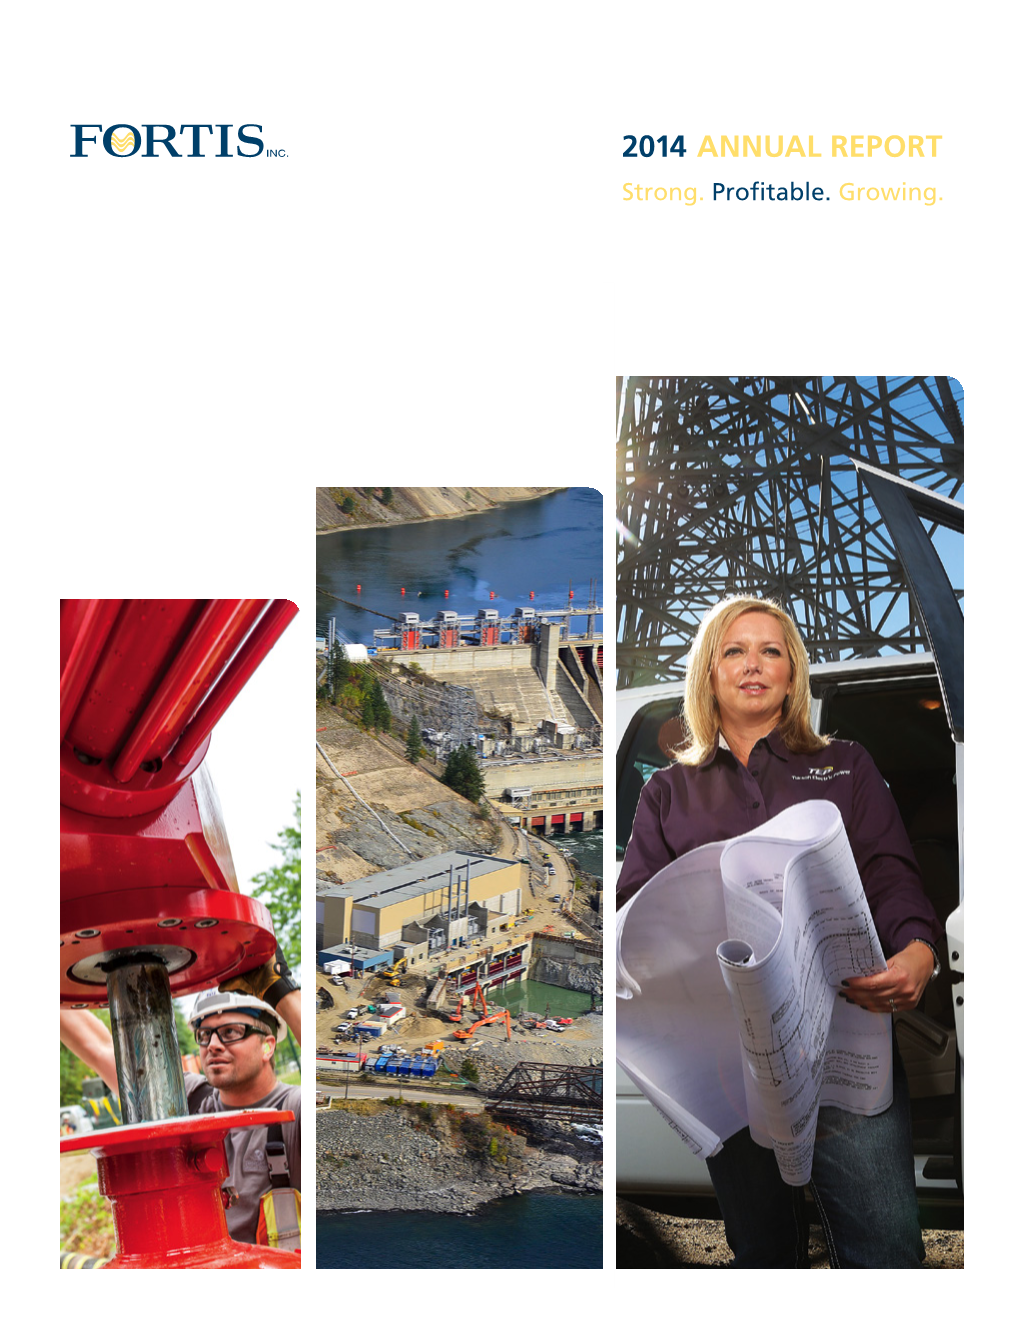 2014 Annual Report – Fortis Inc